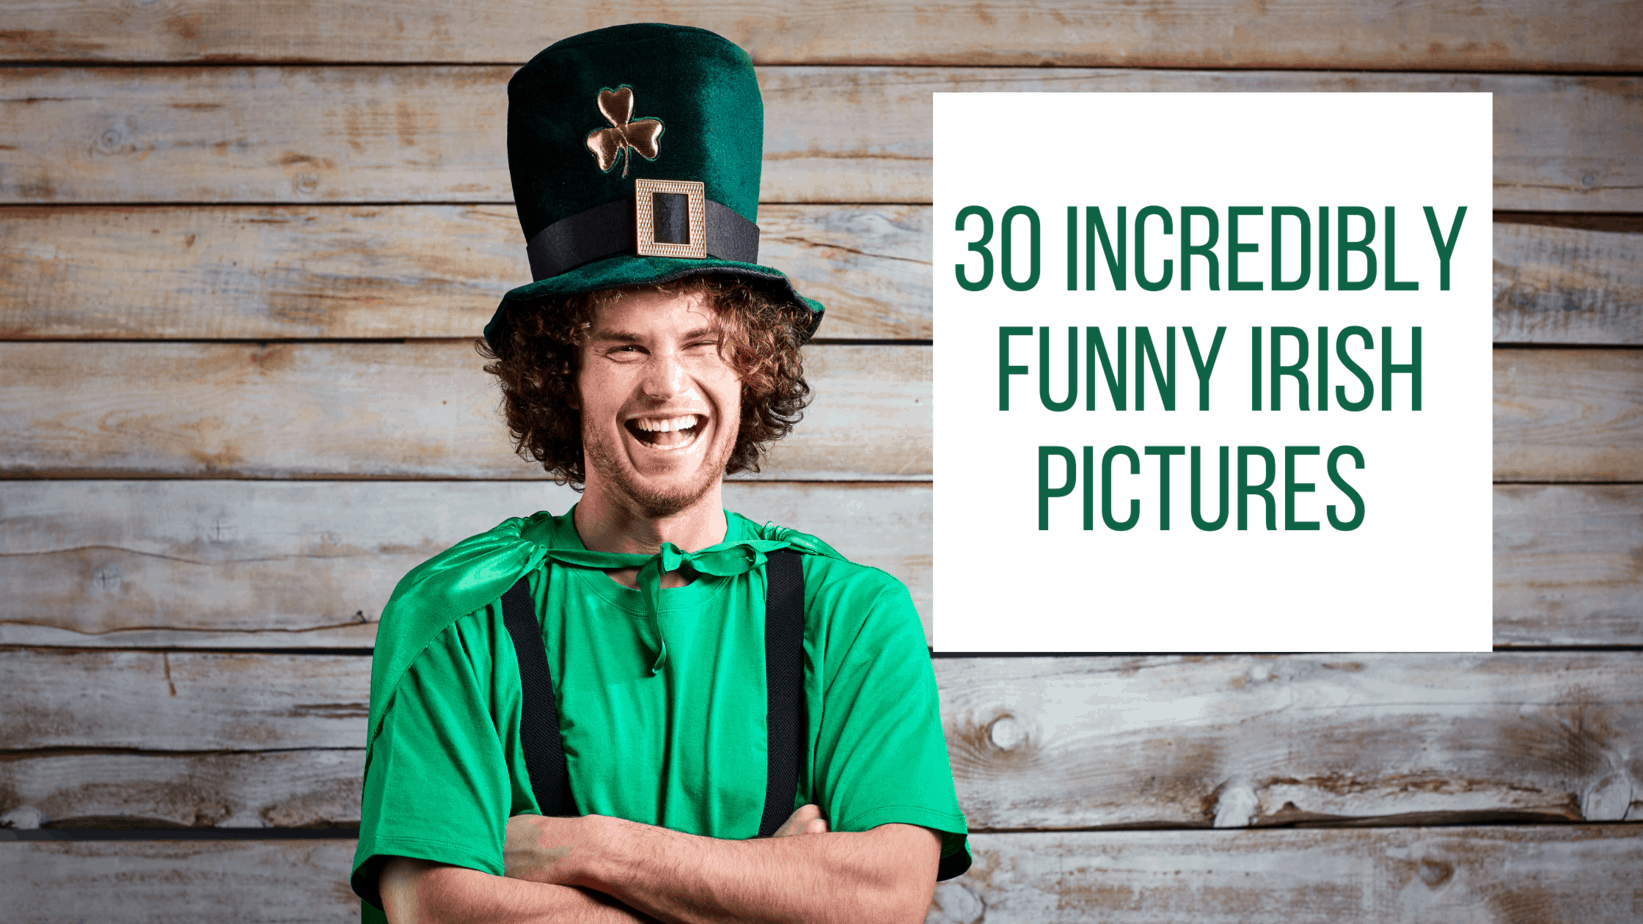 30+ Incredibly Funny Irish Pictures